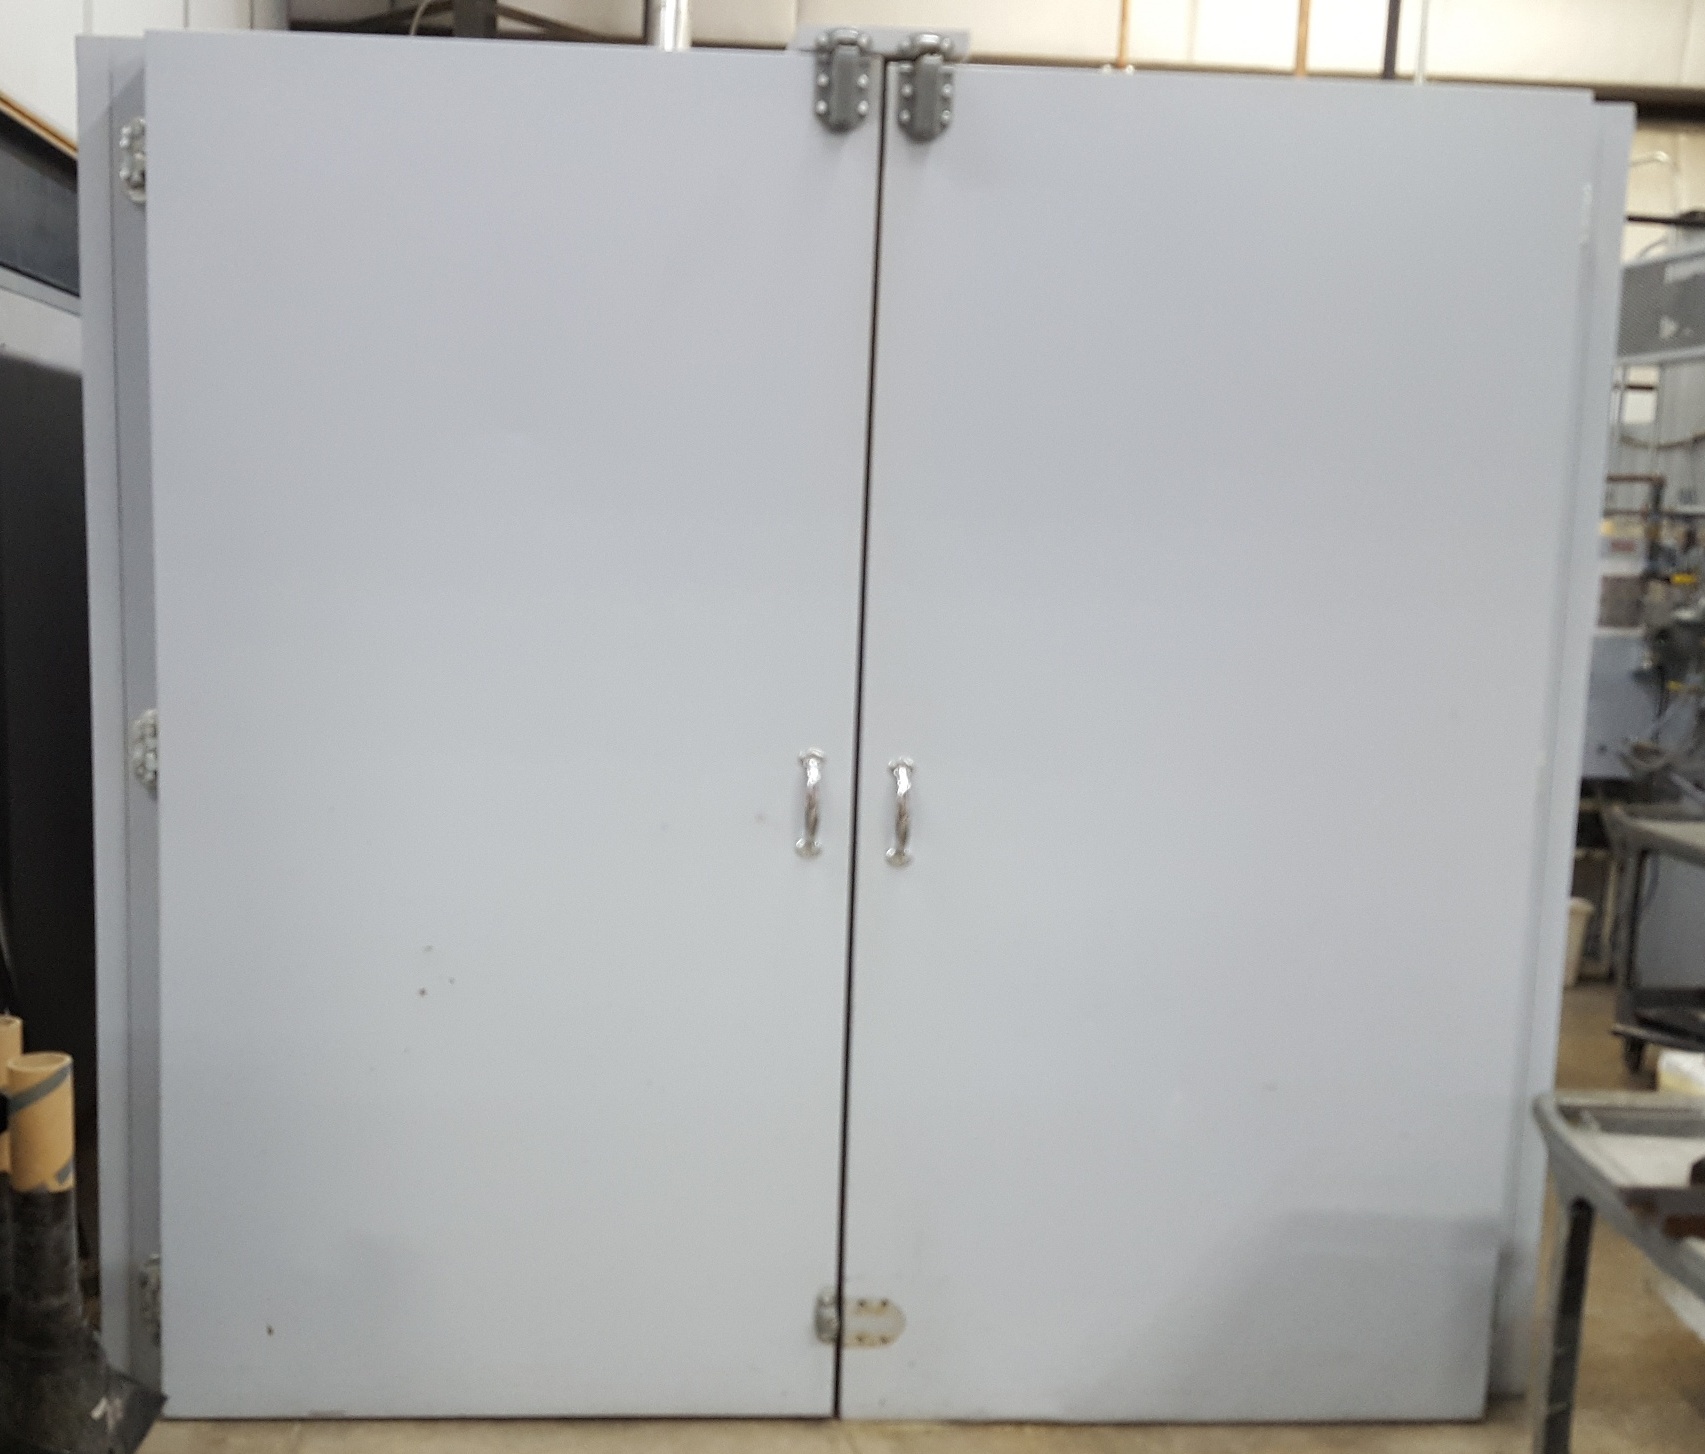 JPW Industrial Process Oven (used) Item # UGE-1